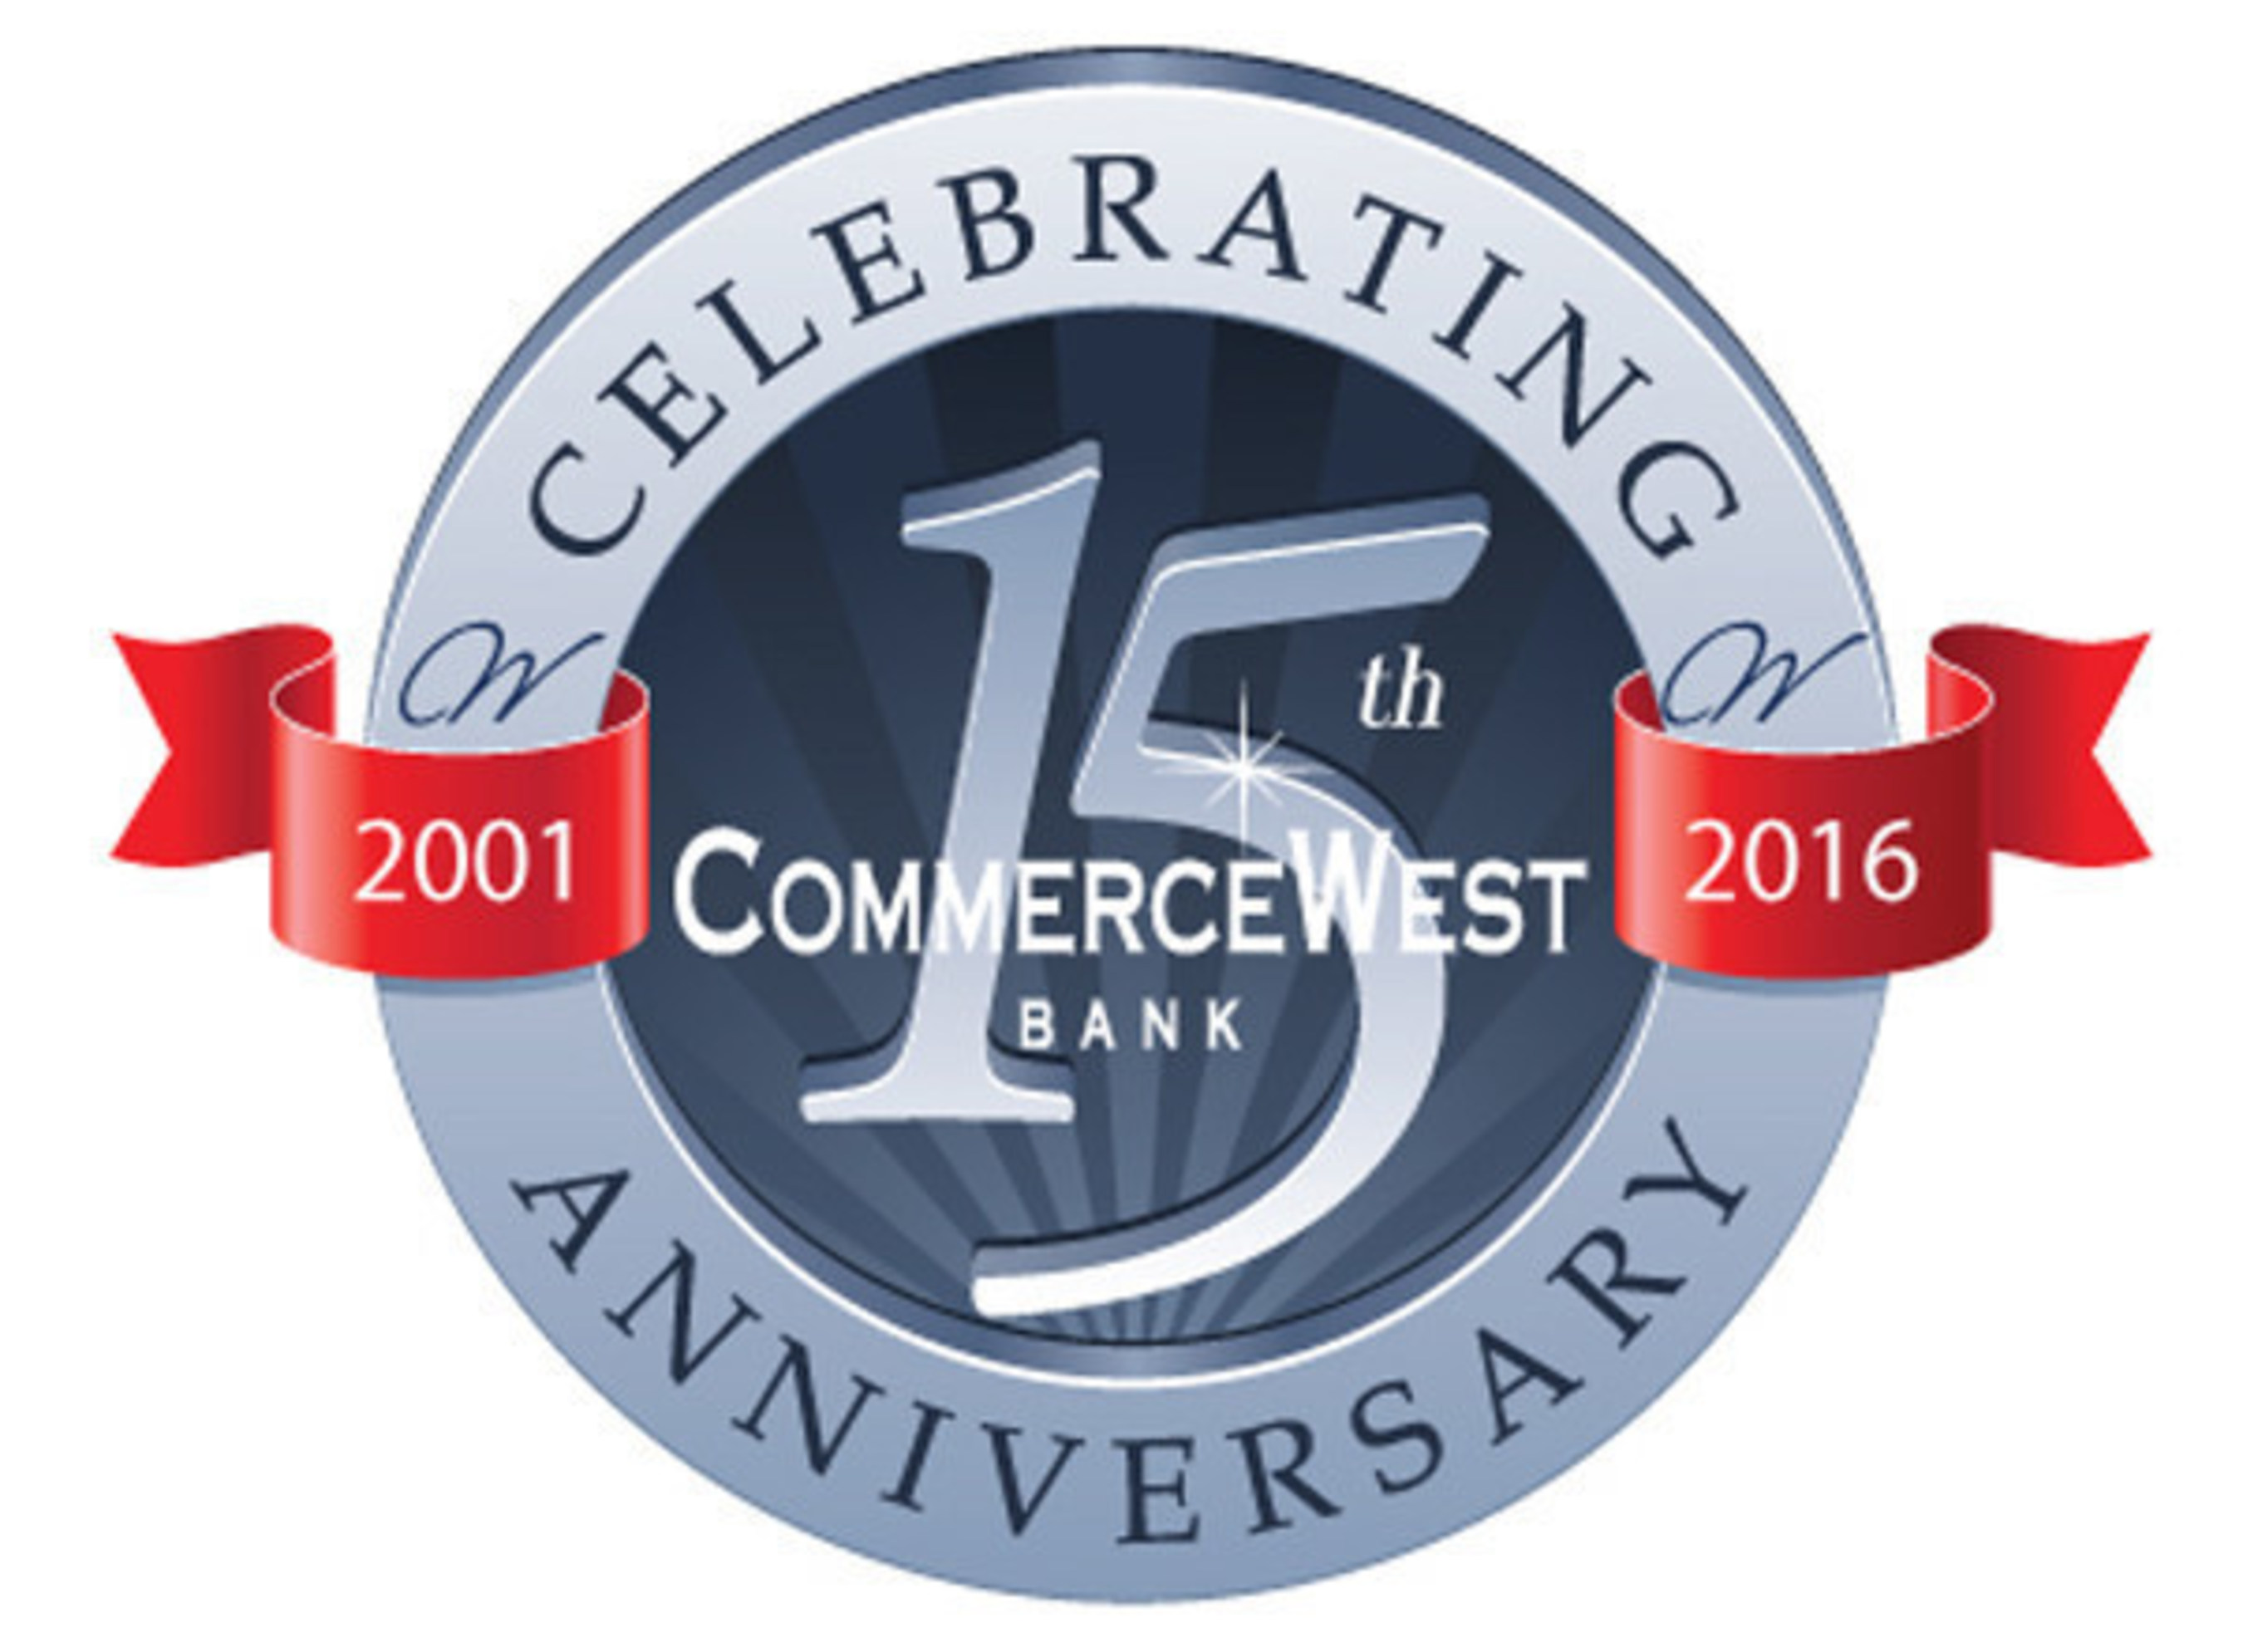 CommerceWest Bank